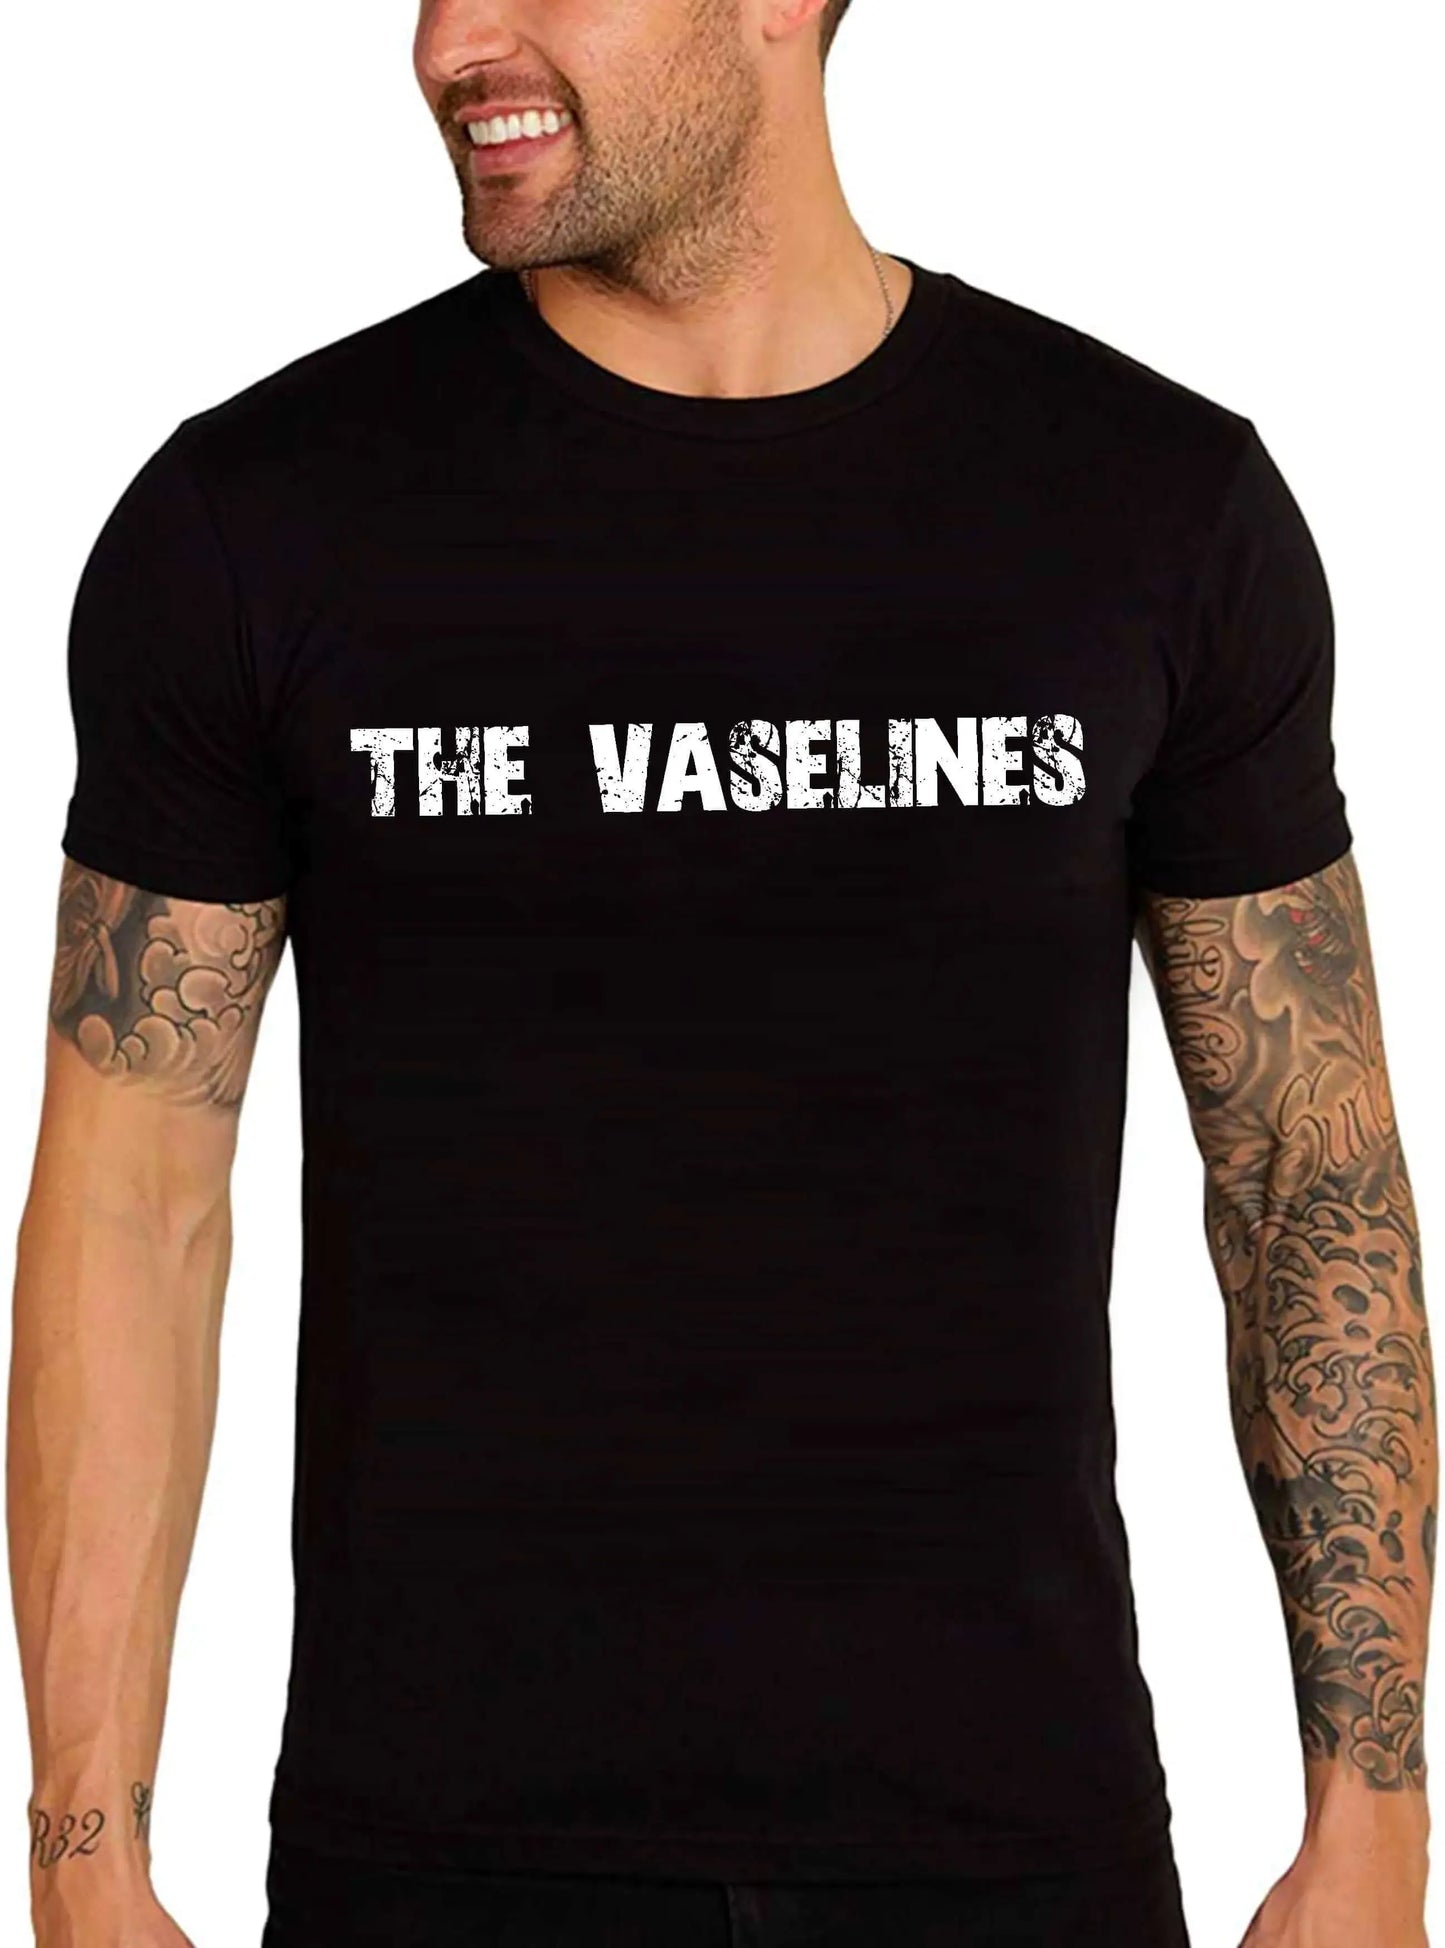 Men's Graphic T-Shirt The Vaselines Eco-Friendly Limited Edition Short Sleeve Tee-Shirt Vintage Birthday Gift Novelty